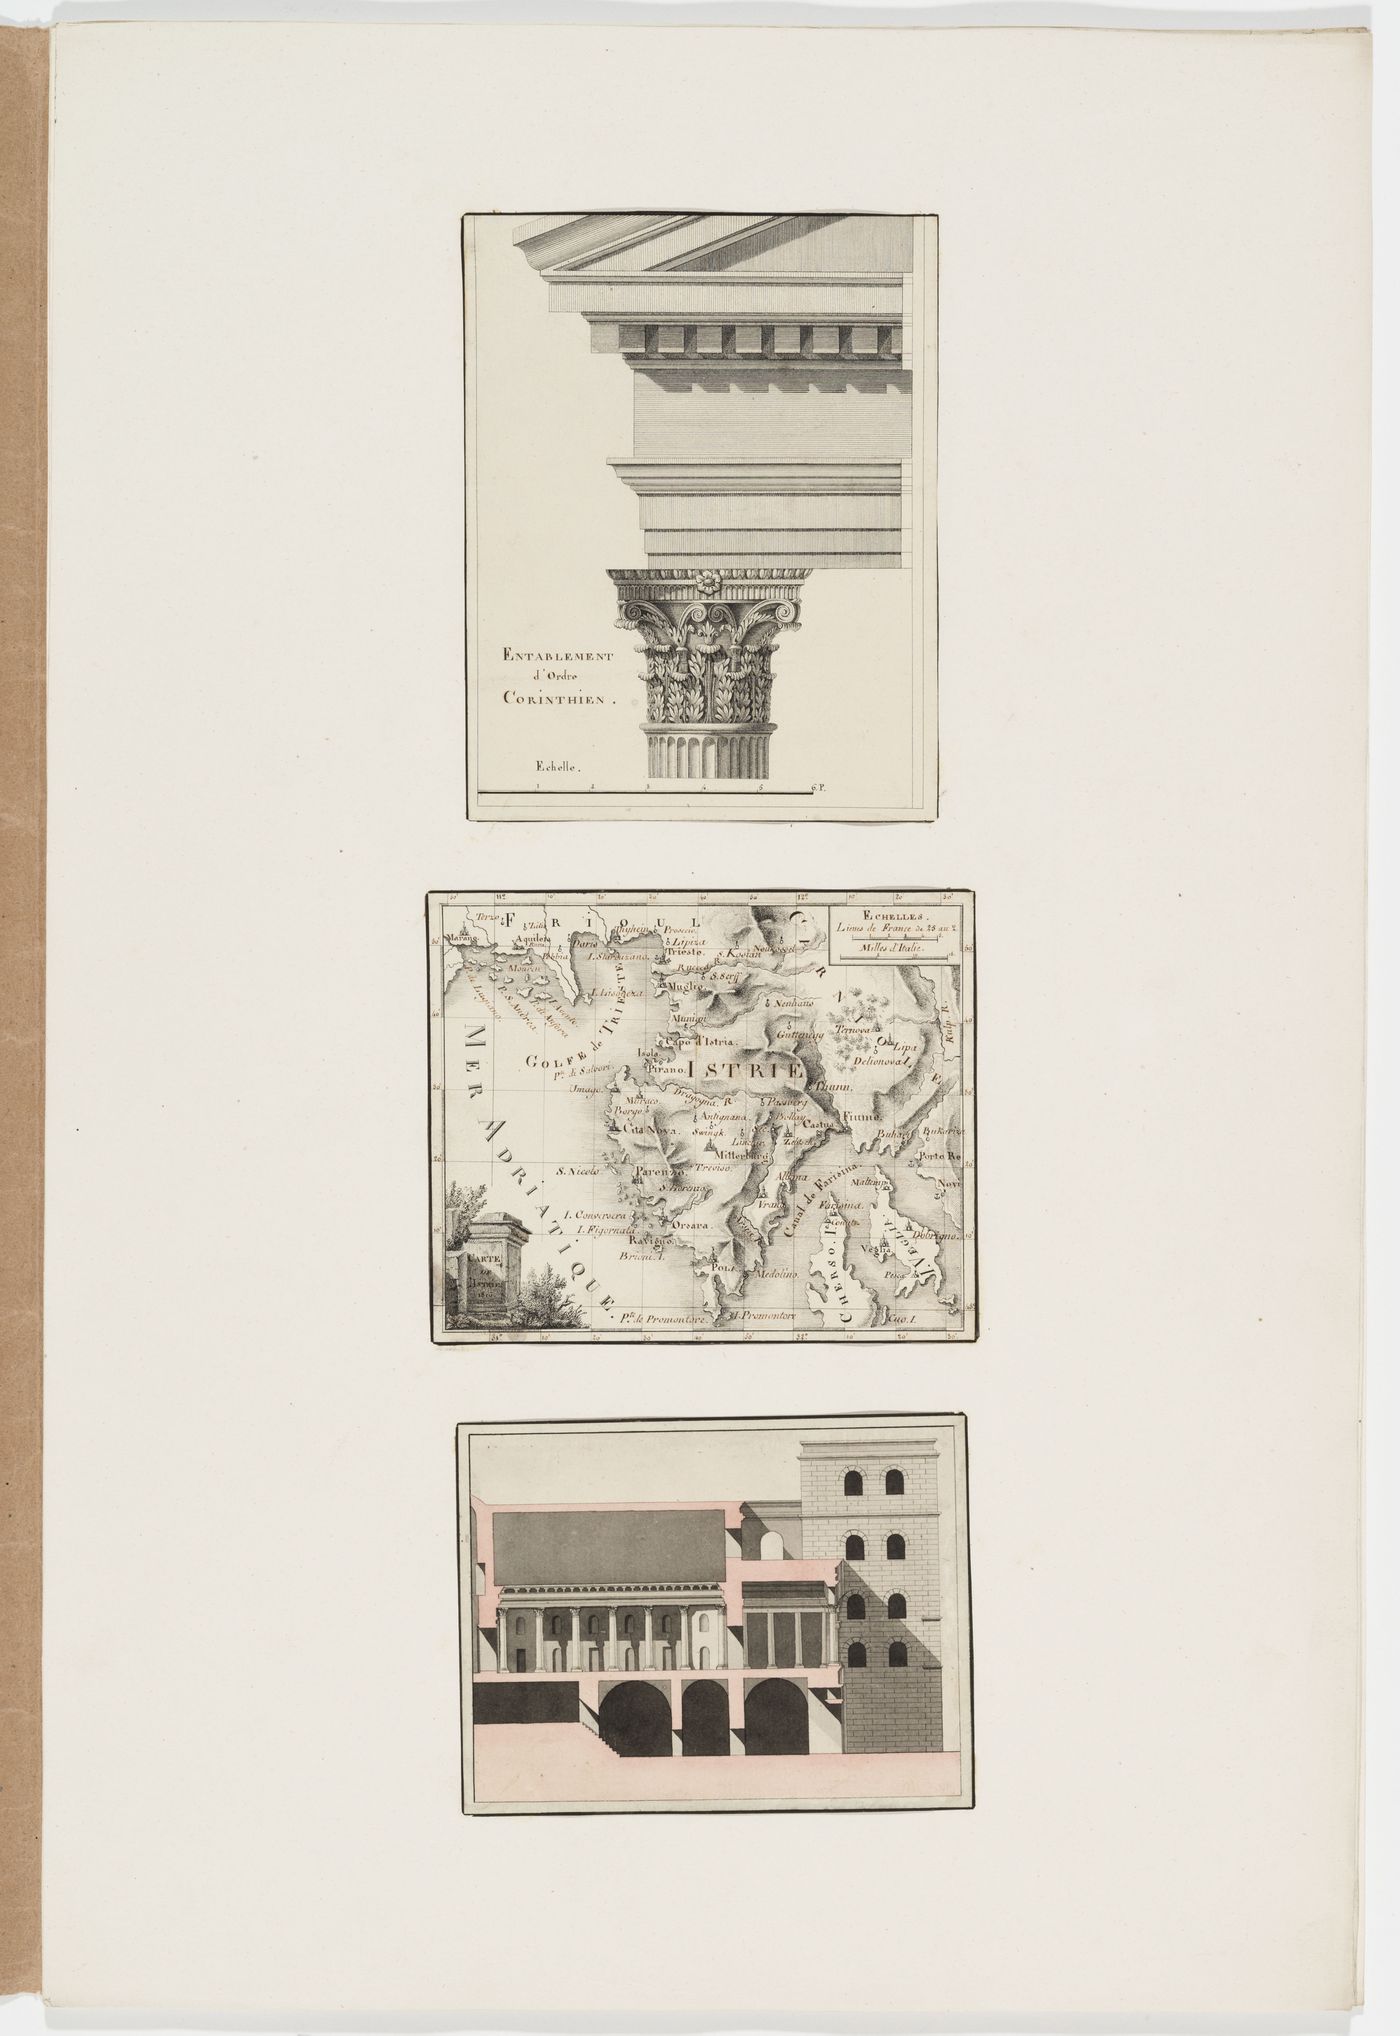 Elevation of a Corinthian capital and entablature; Map of Istria; Sectional elevation of an unidentified building